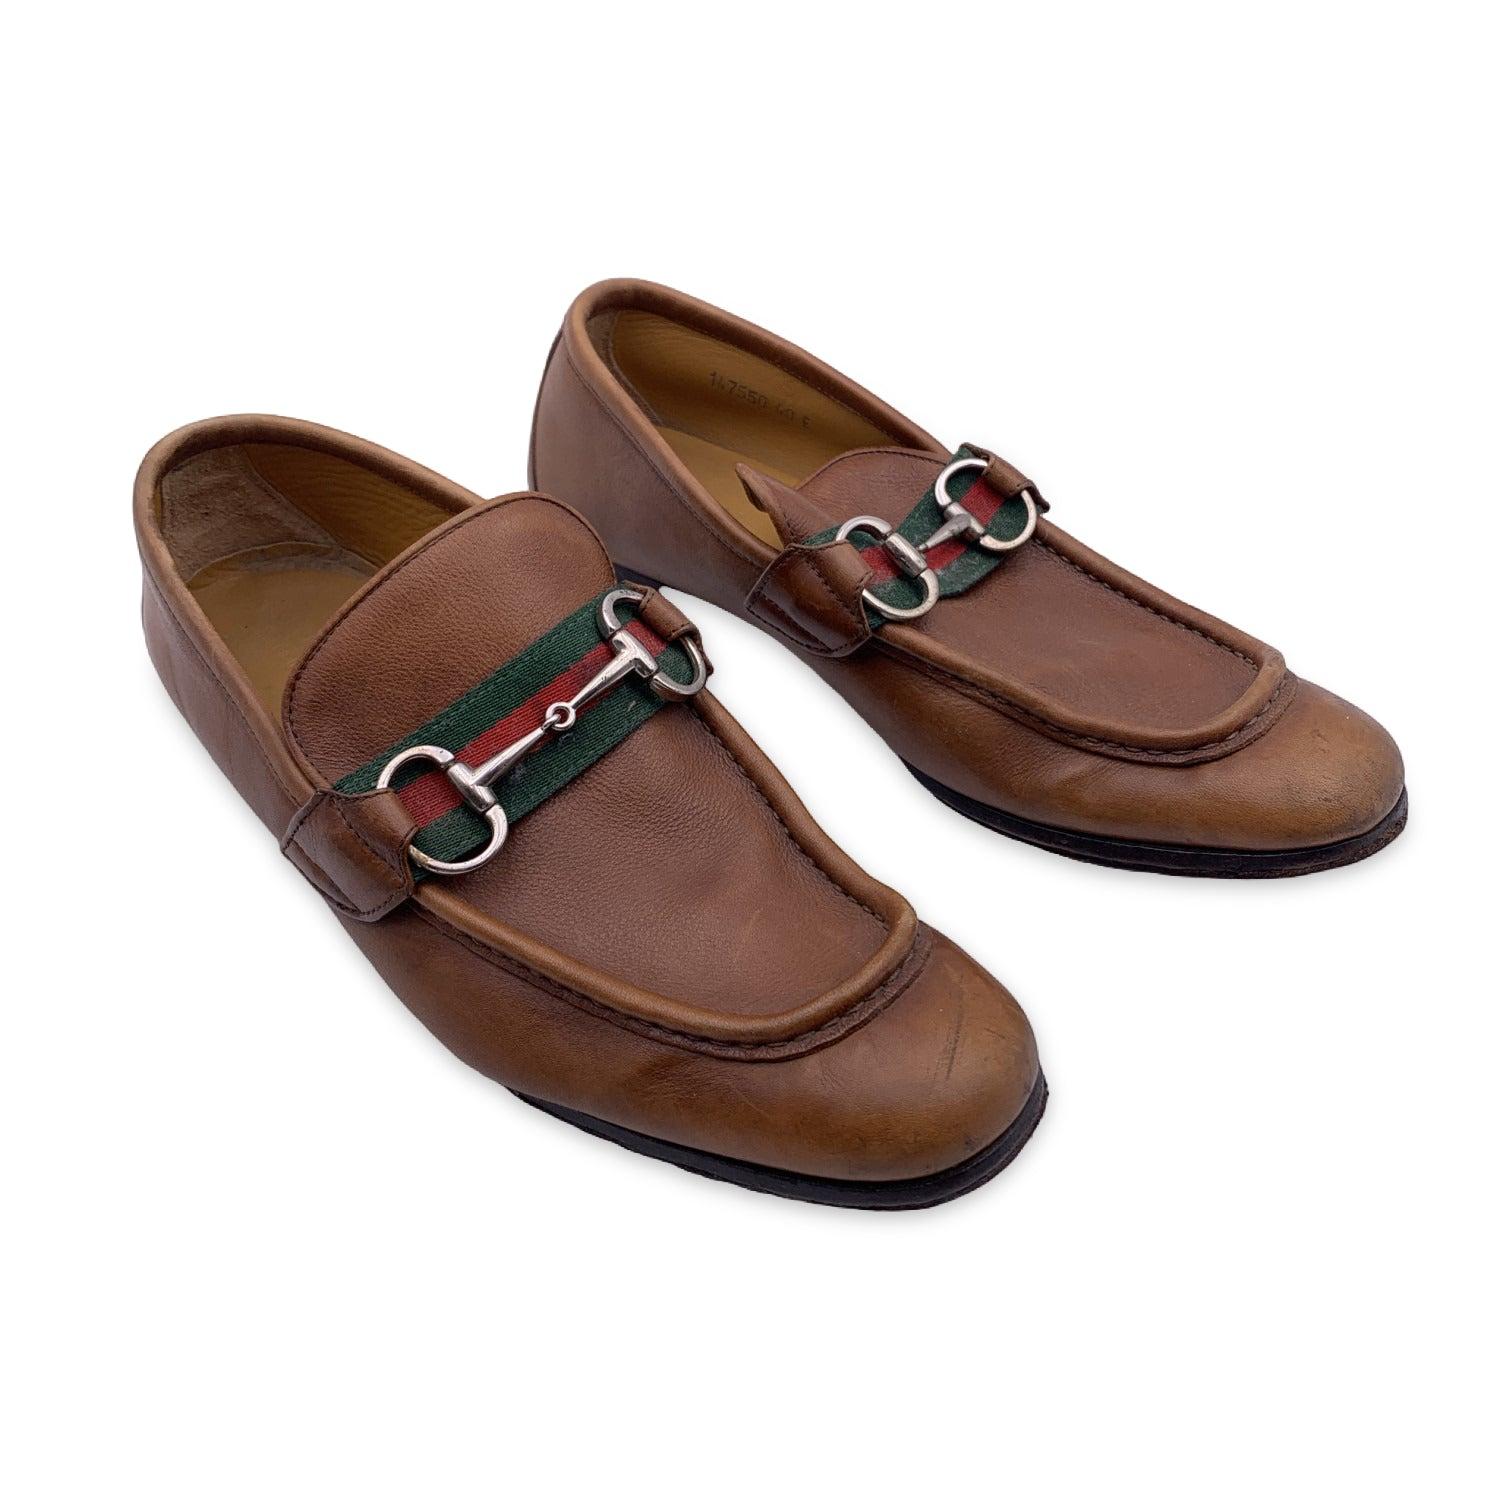 Light brown Leather loafers by GUCCI designed with a almond toe. Light brown leather with green and red Web detail. Horsebit detail on the toes. Leather outsoles. Made in Italy. Size: 40 (The size shown for this item is the size indicated by the